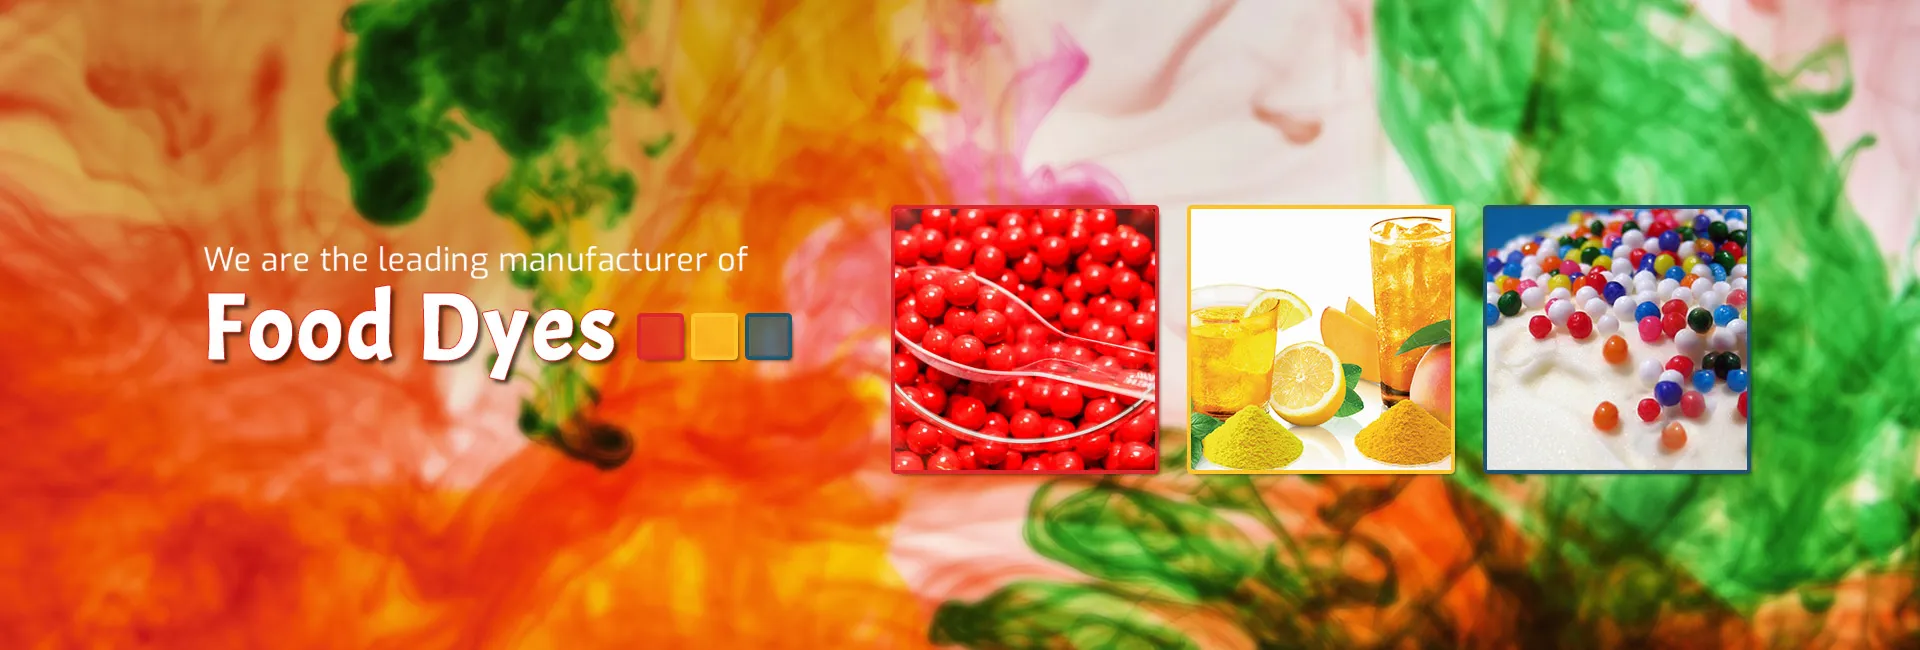 Food Dyes Manufacturer & Suppliers in Thailand